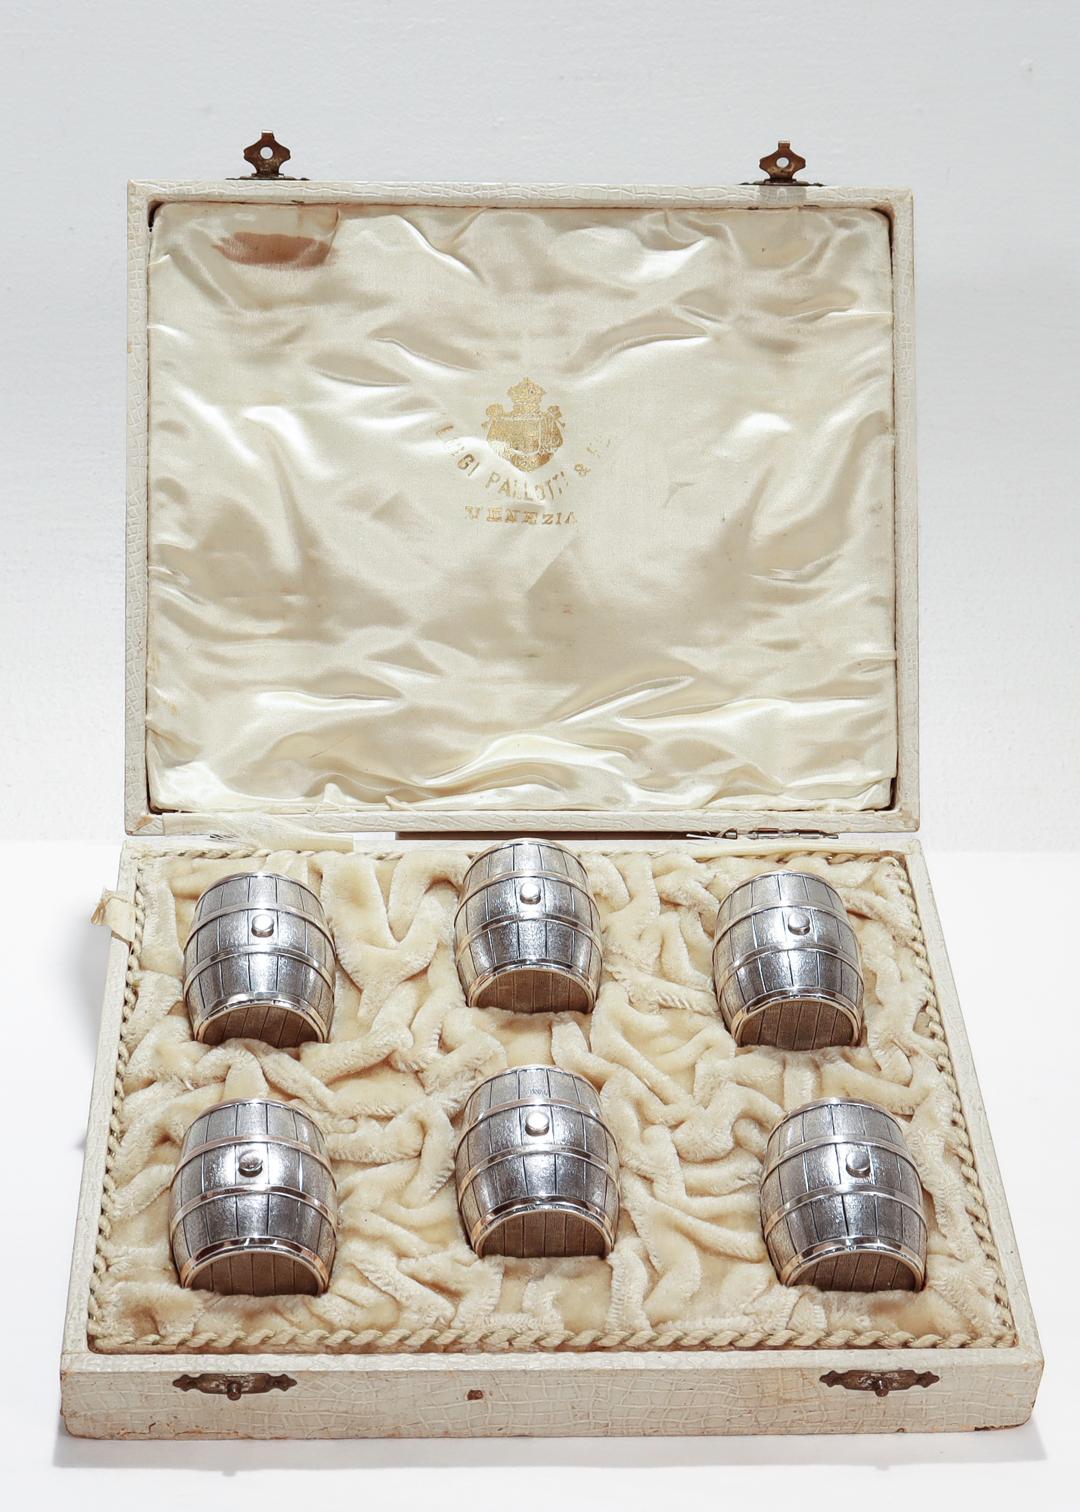 A fine set of 6 Italian silver figural shot glasses.

In the form of trompe l'oeil whisky barrels with gilt bands and corks.

Together with their original retailer's box that is marked for Luigi Pallotti and Fils, Venice.

Silver unmarked for maker